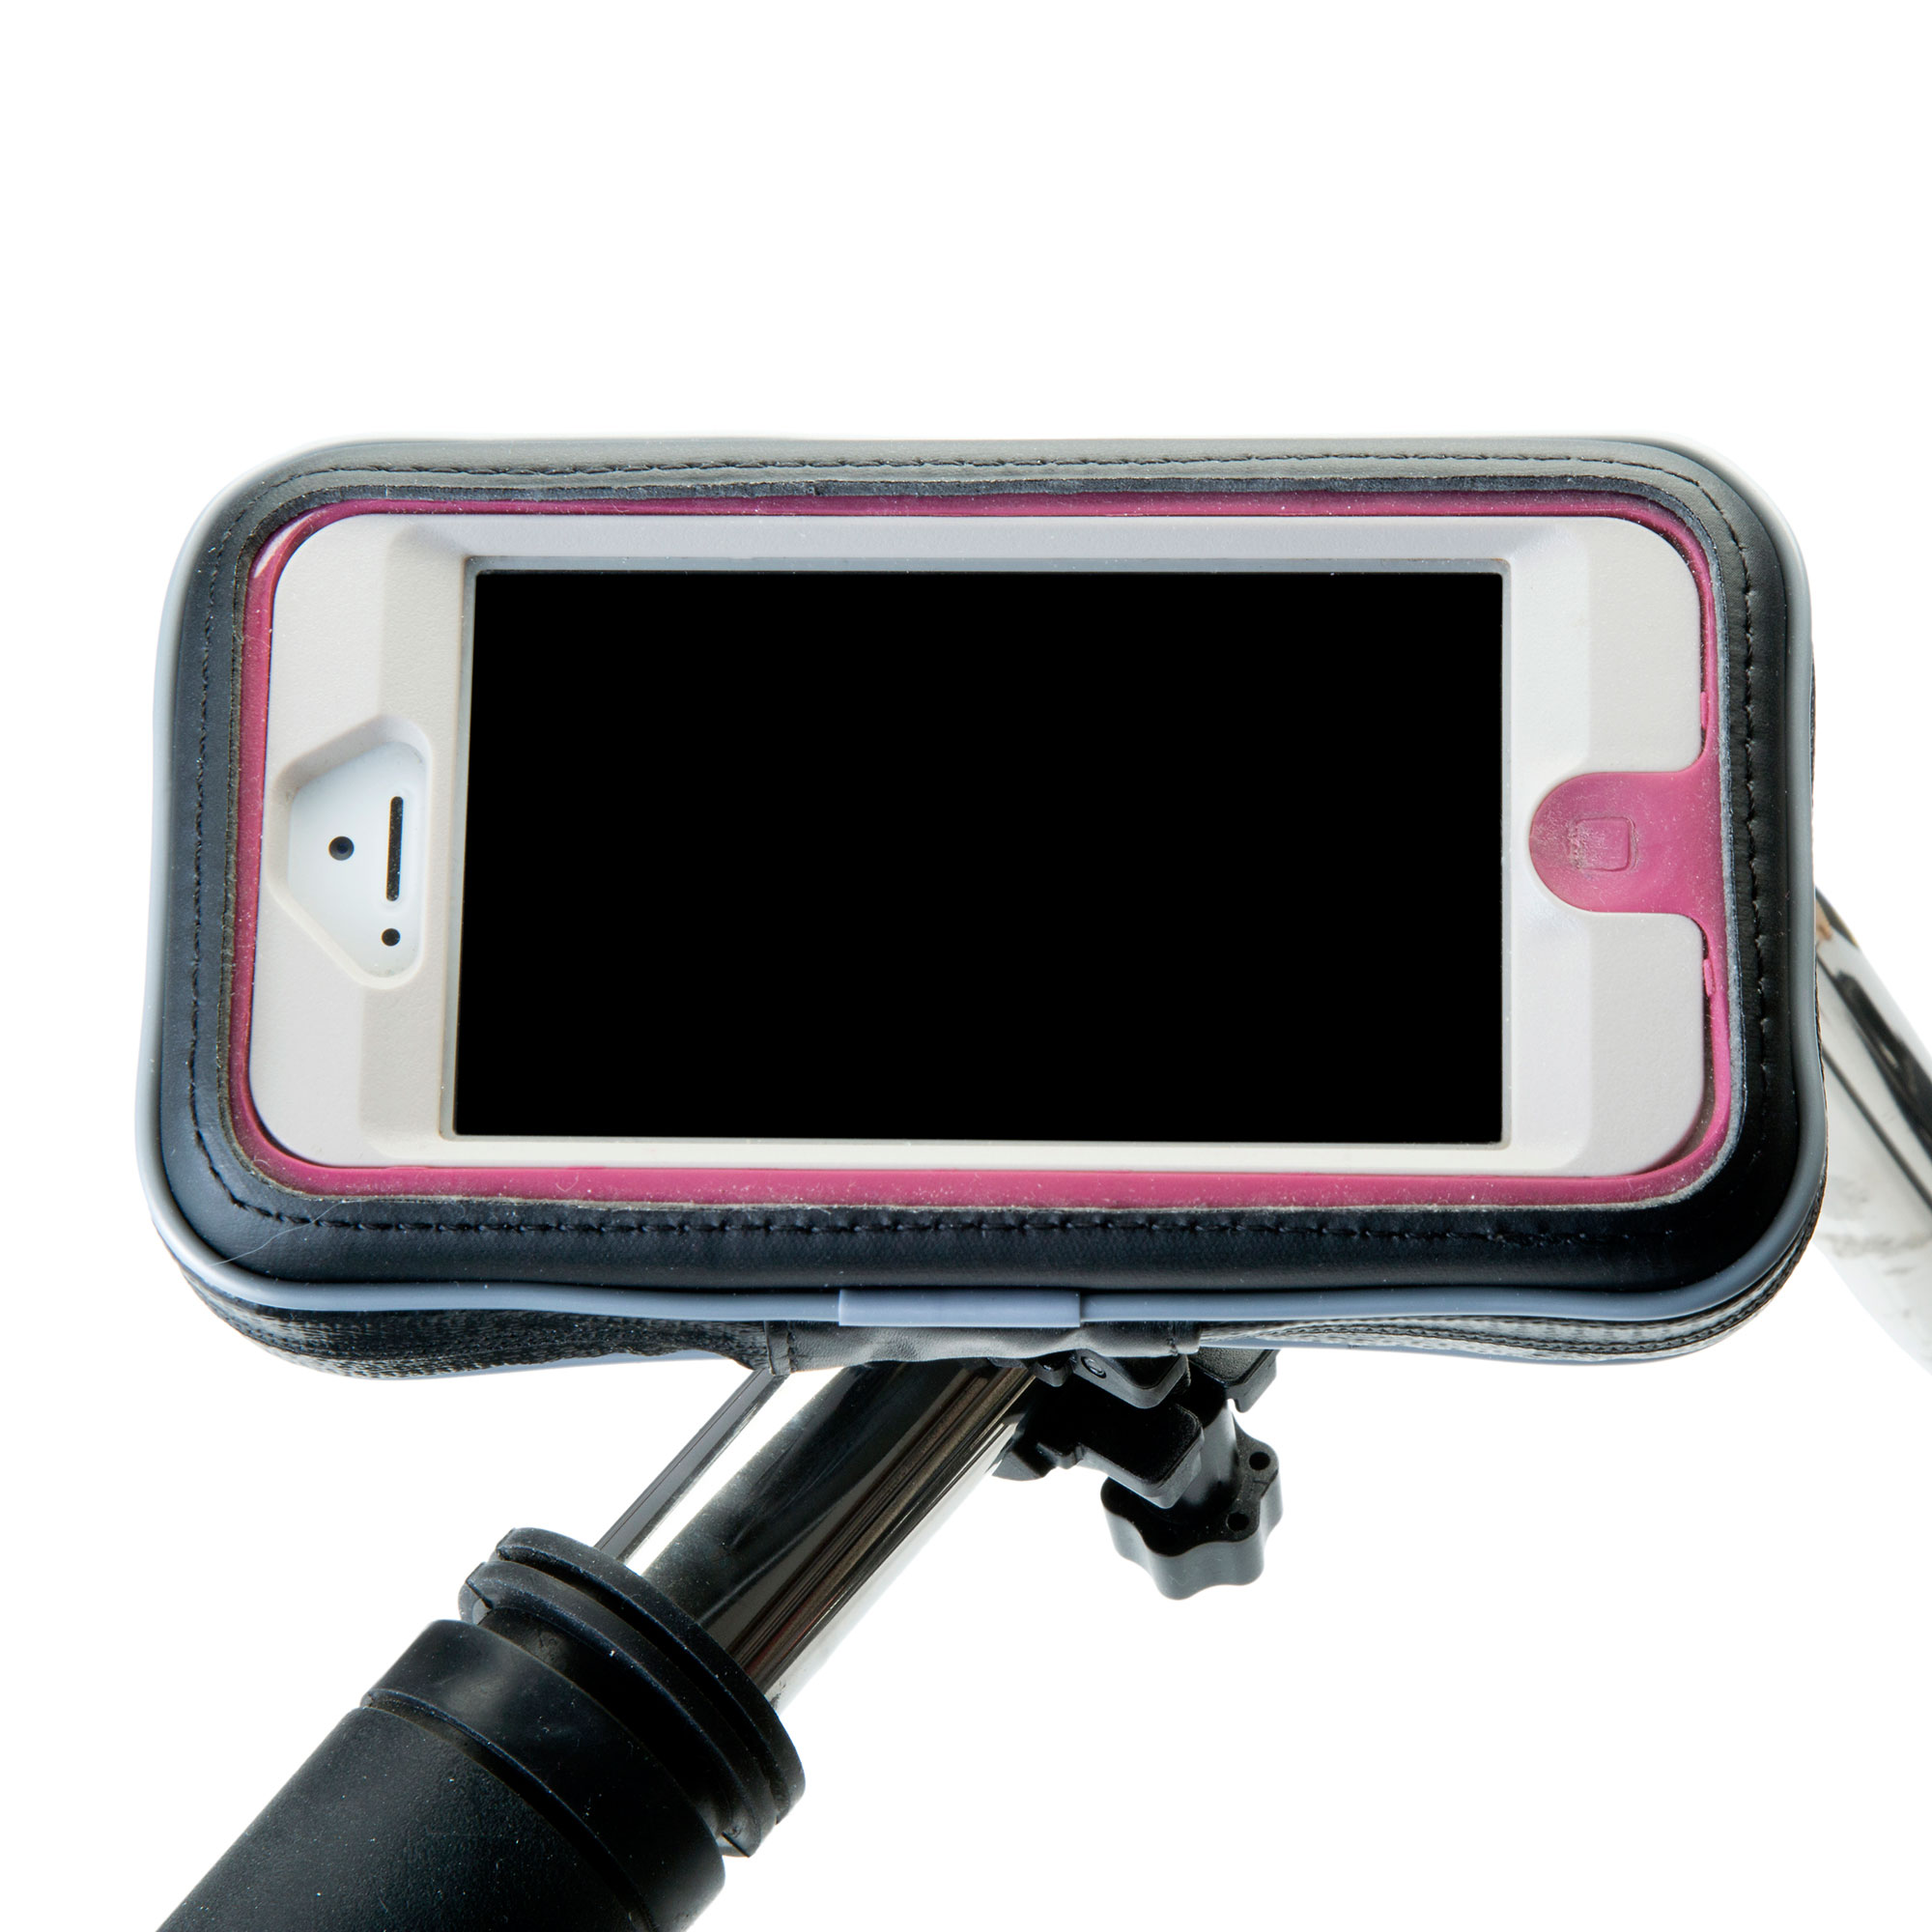 Heavy Duty Weather Resistant Bicycle / Motorcycle Handlebar Mount Holder Designed for the LG Optimus Sol